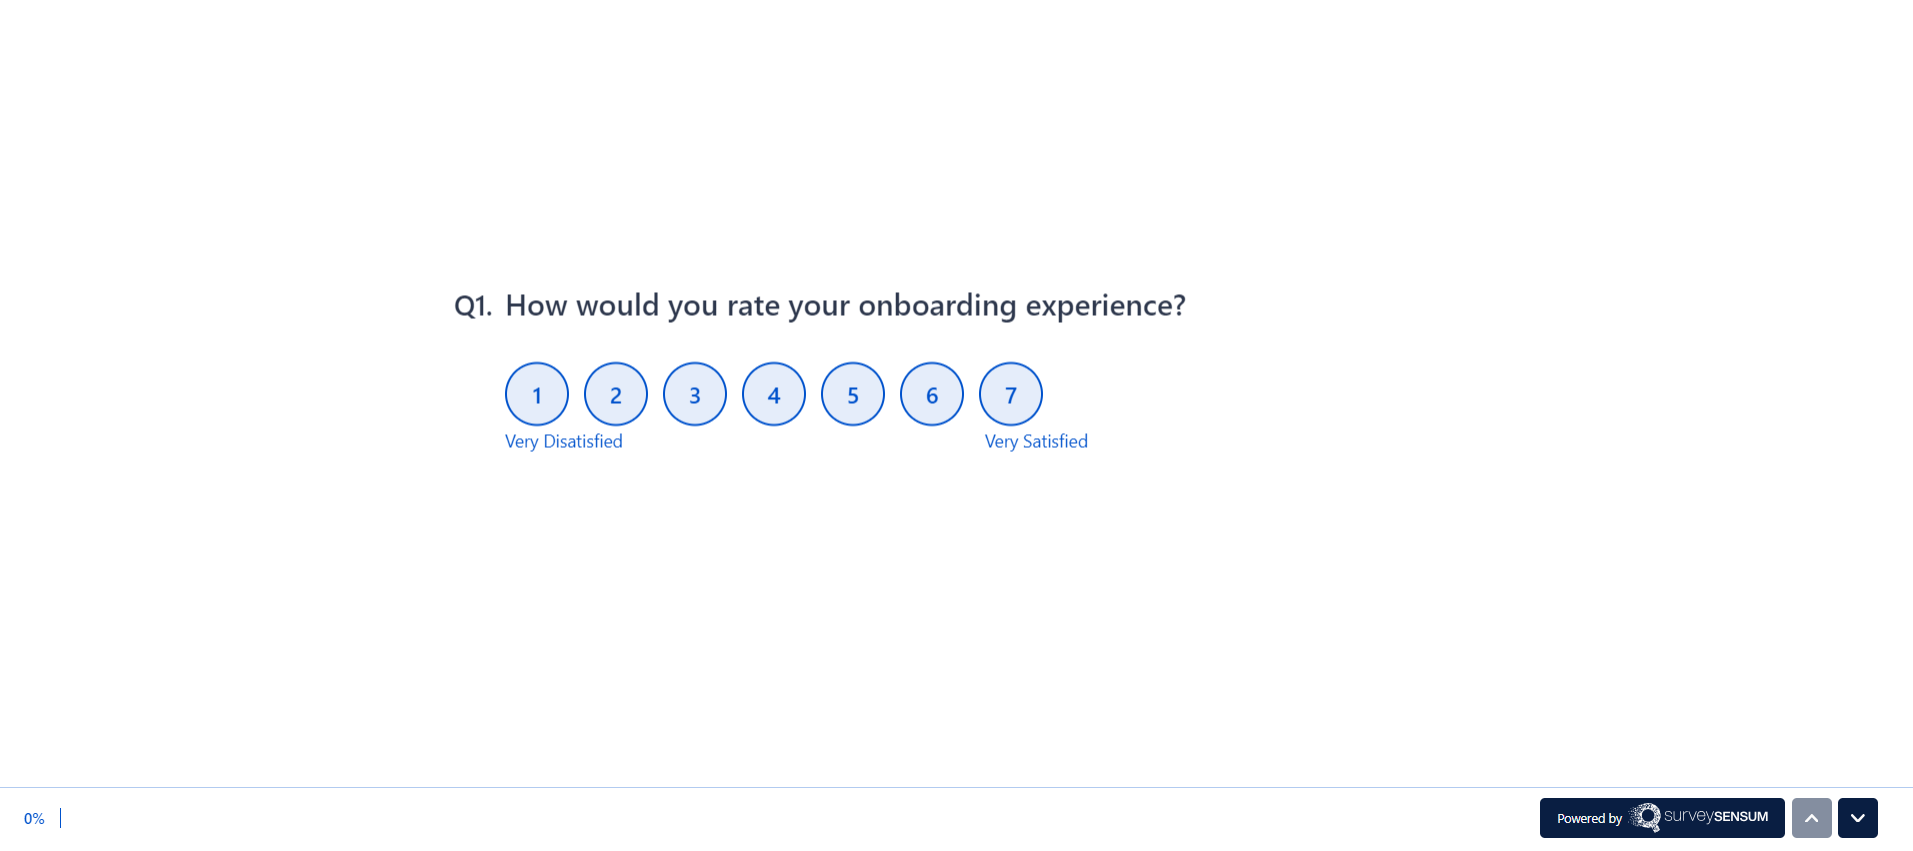 the image shows a question example of Onboarding Surveys offered by SurveySensum which is directed towards gathering employees’ onboarding experience.